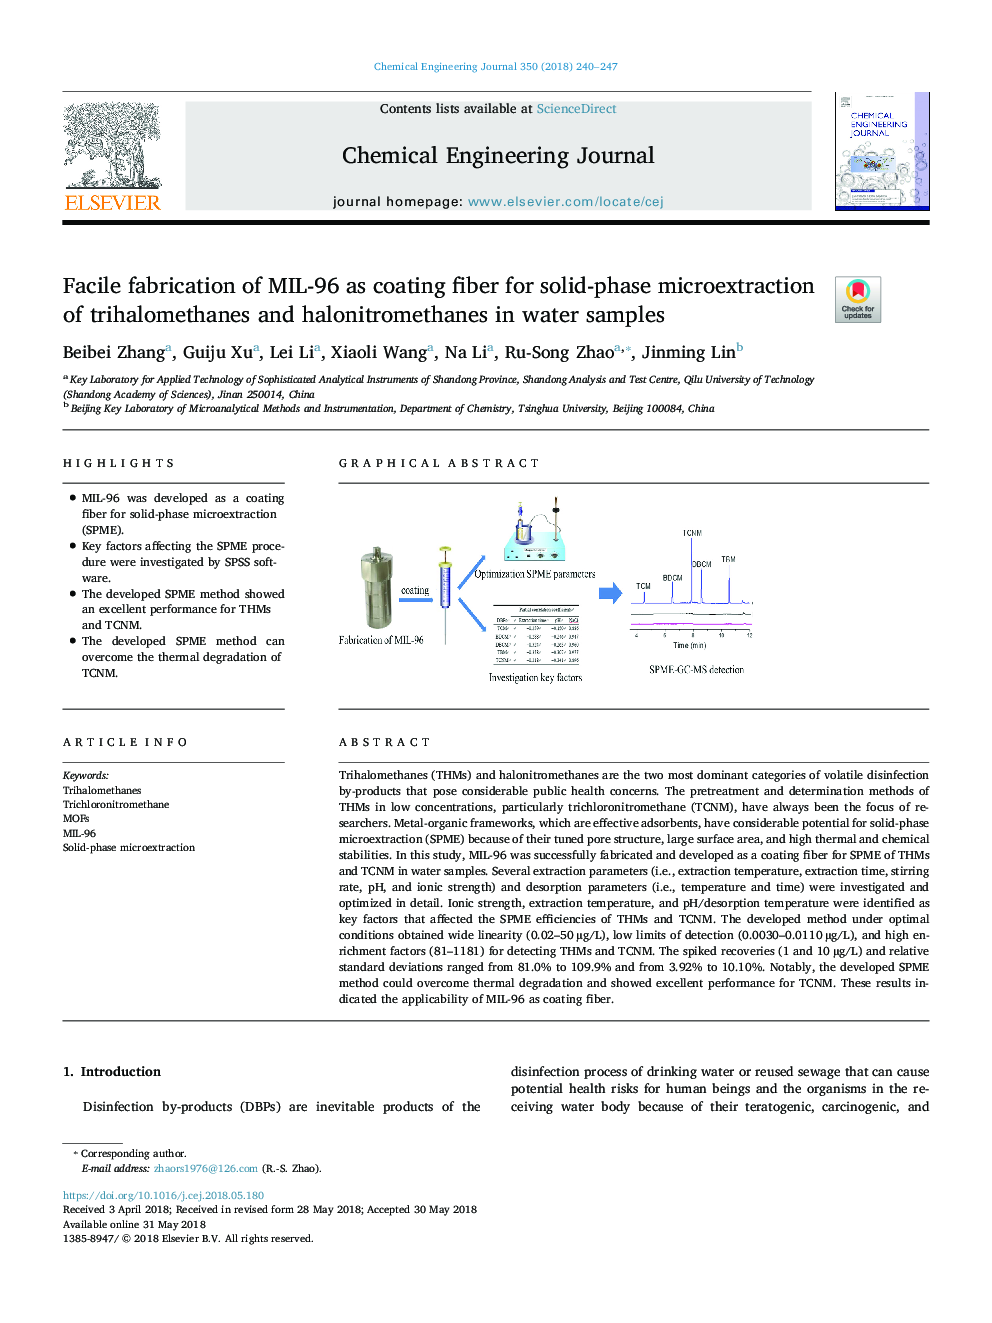 Facile fabrication of MIL-96 as coating fiber for solid-phase microextraction of trihalomethanes and halonitromethanes in water samples